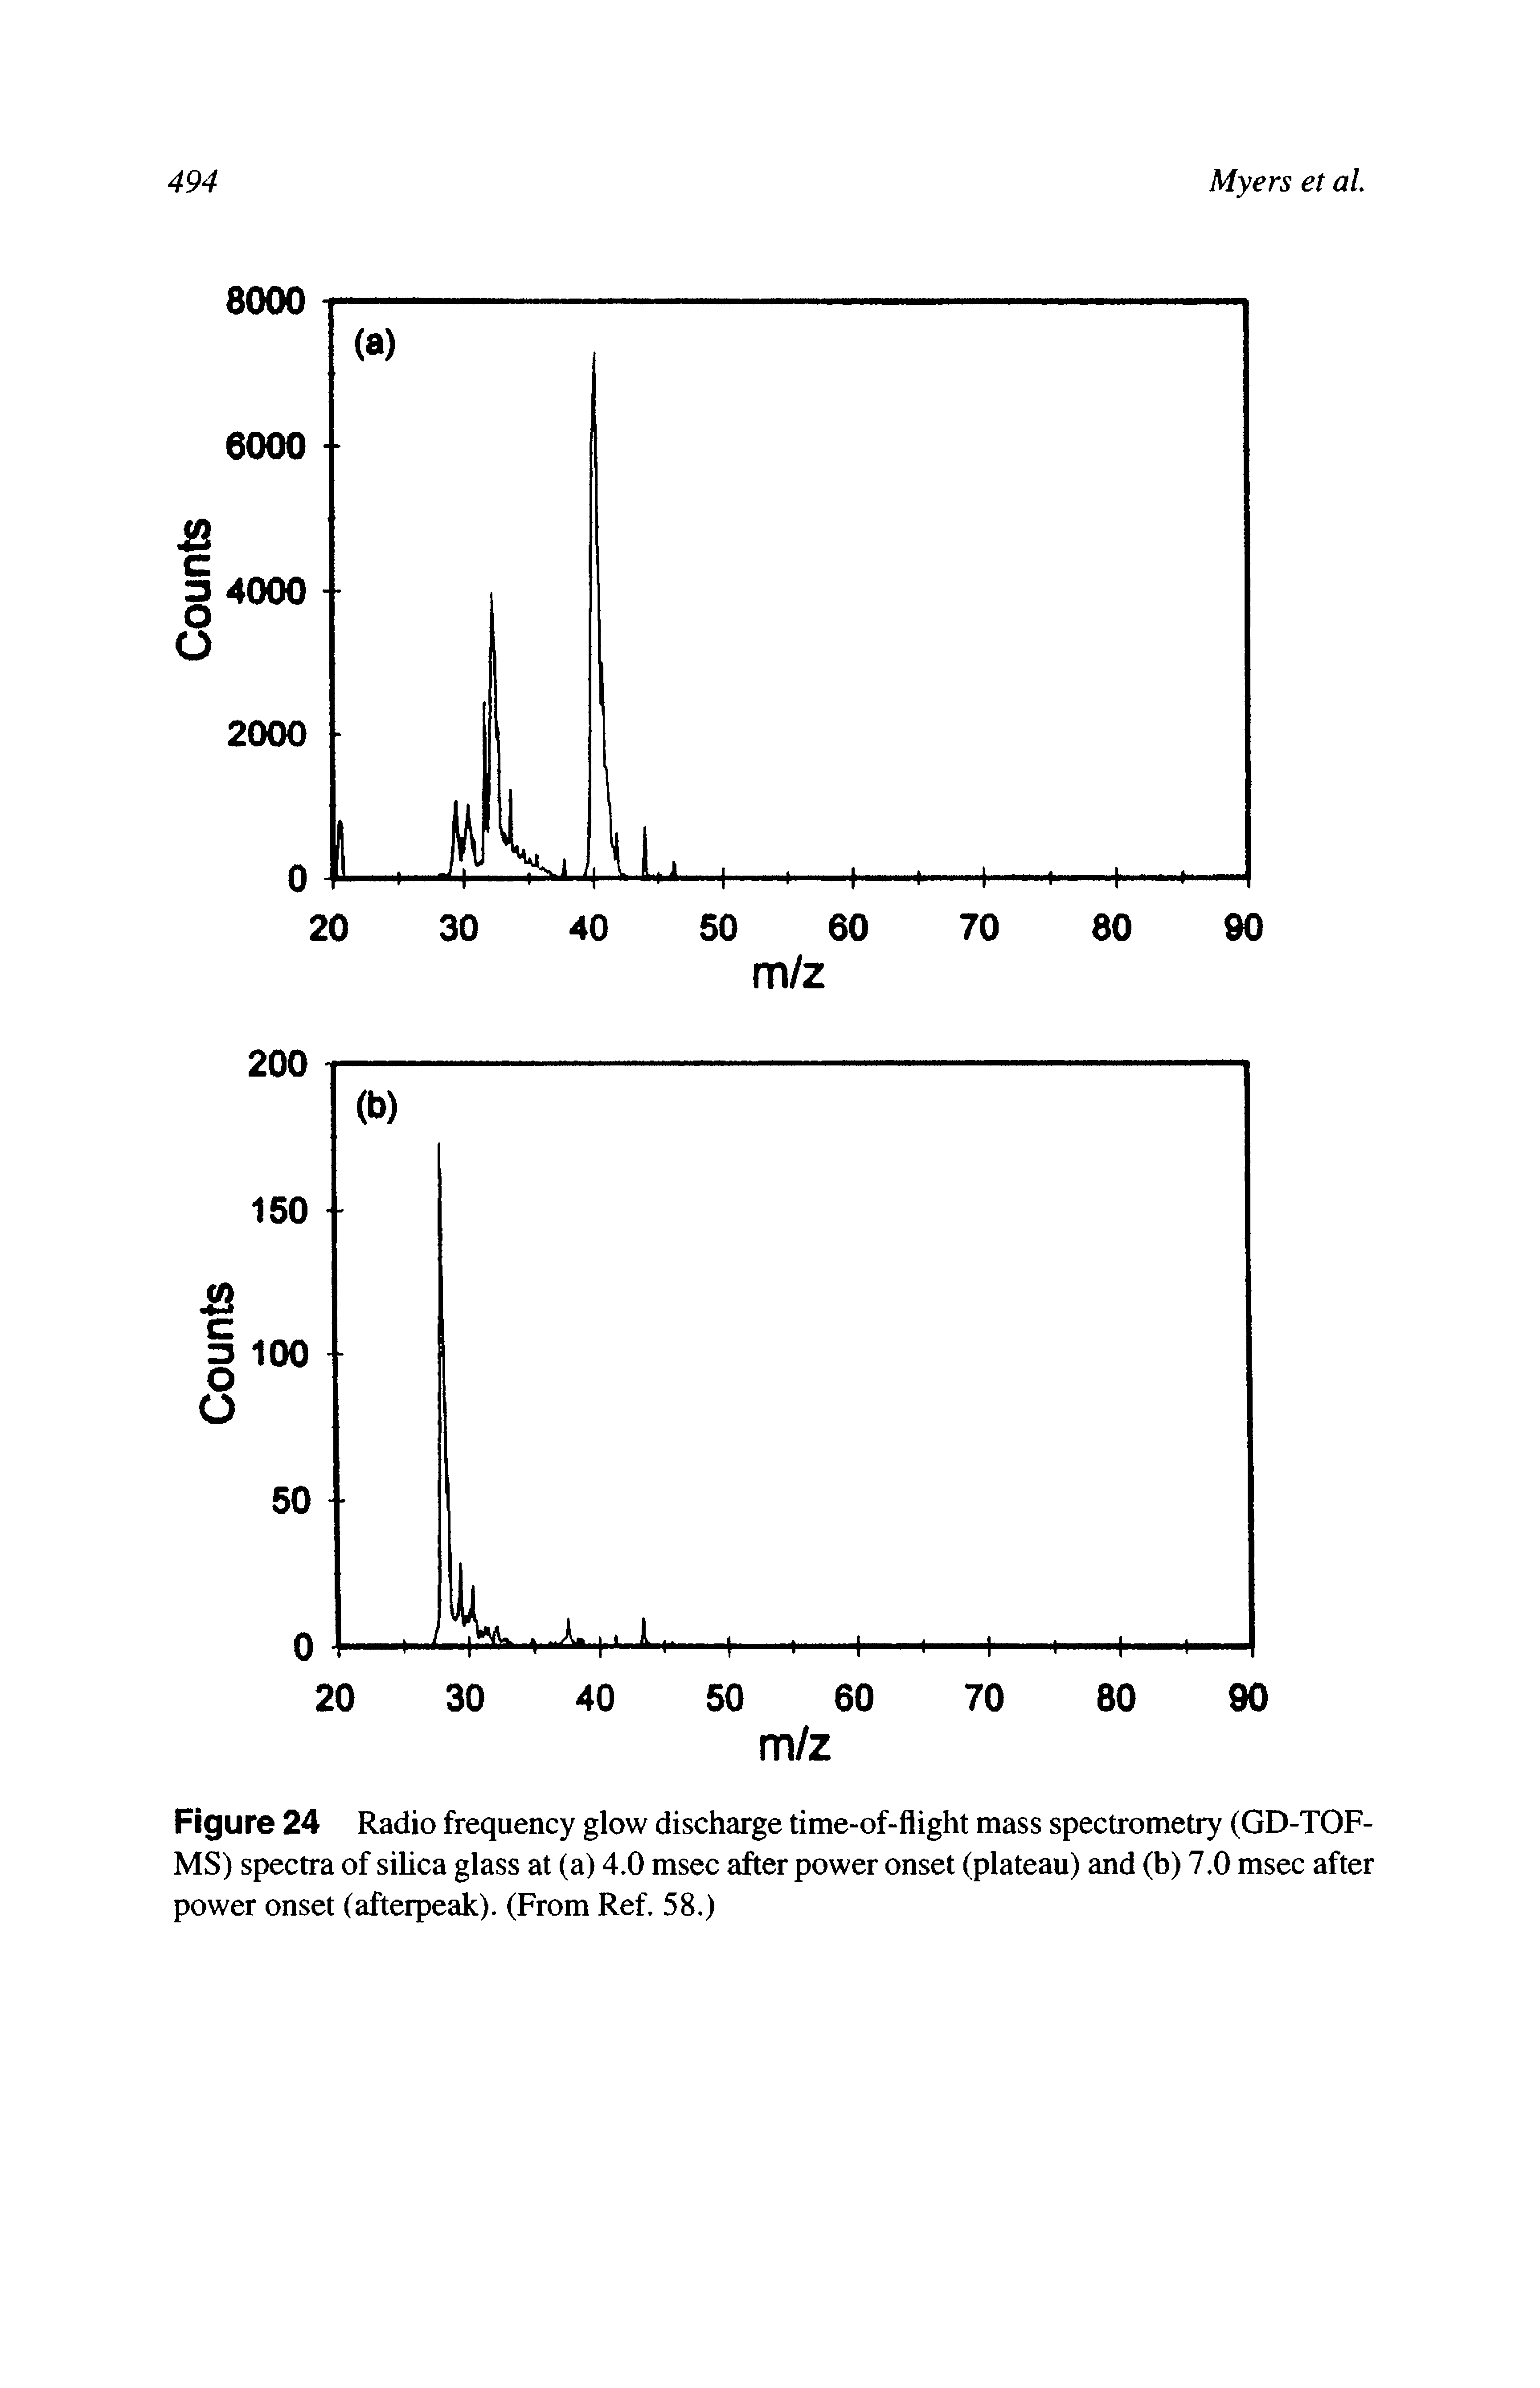 Figure 24 Radio frequency glow discharge time-of-flight mass spectrometry (GD-TOF-MS) spectra of silica glass at (a) 4.0 msec after power onset (plateau) and (b) 7.0 msec after power onset (afterpeak). (From Ref. 58.)...